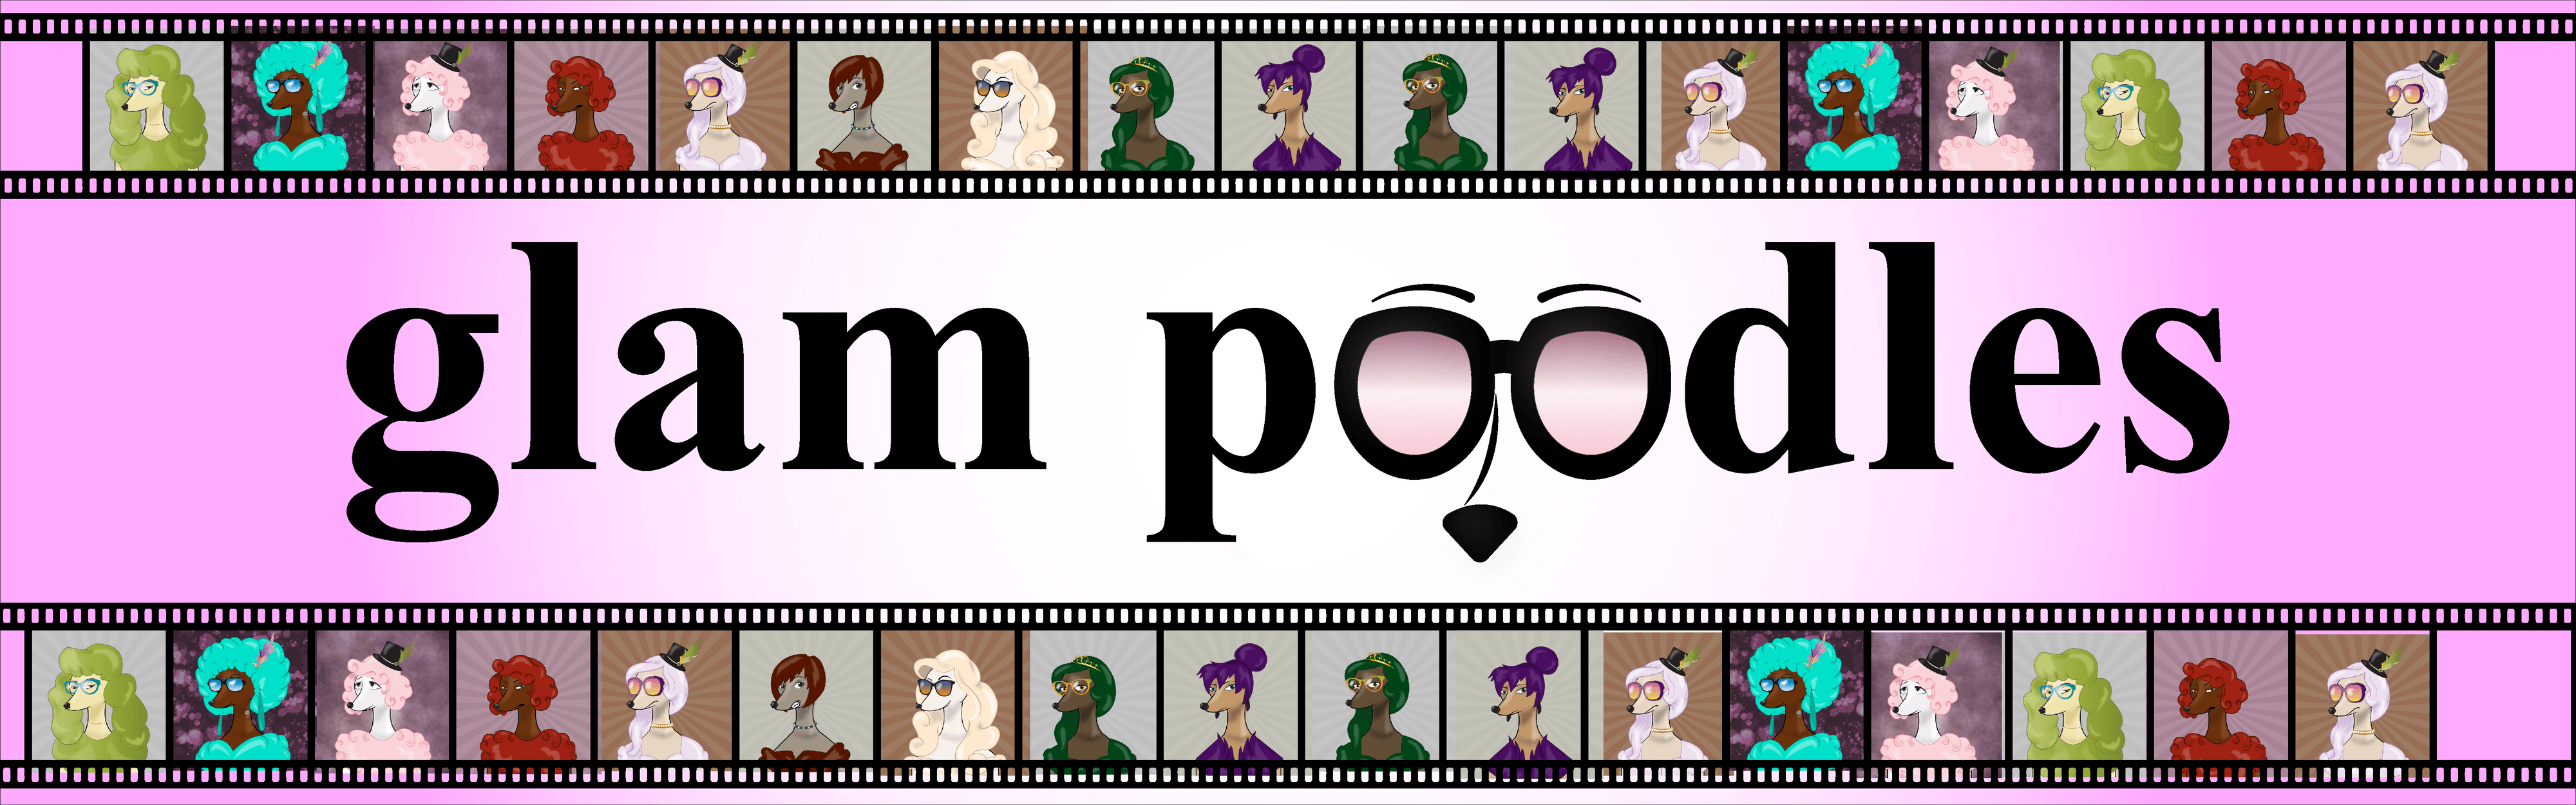 GlamPoodles banner